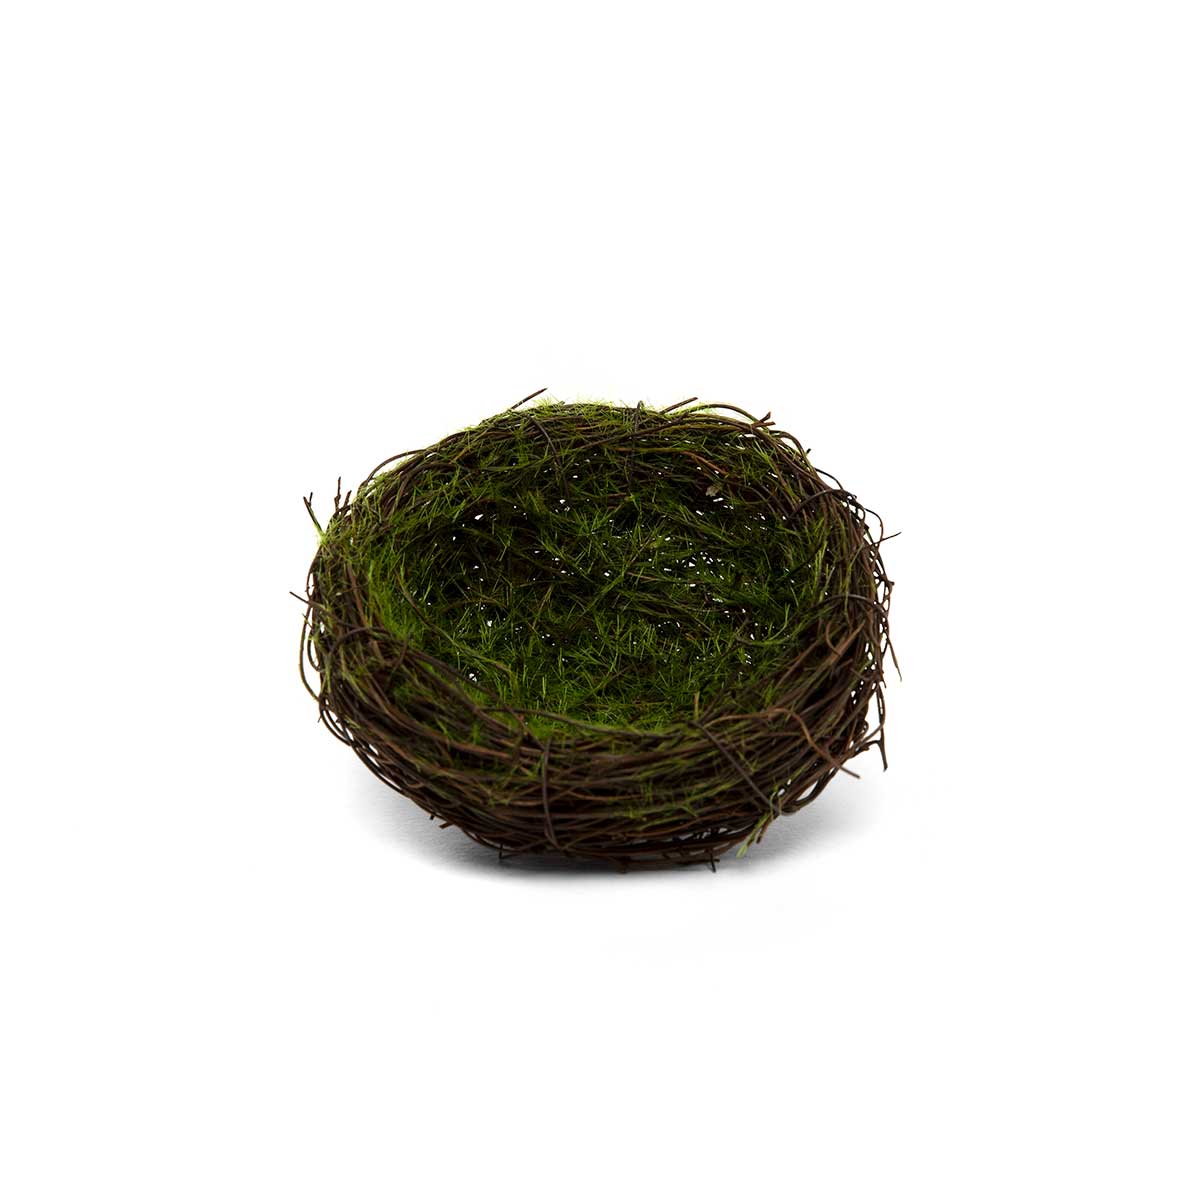 TWIG NEST MOSSY SMALL 4IN X 1.5IN TWIG/WOOD